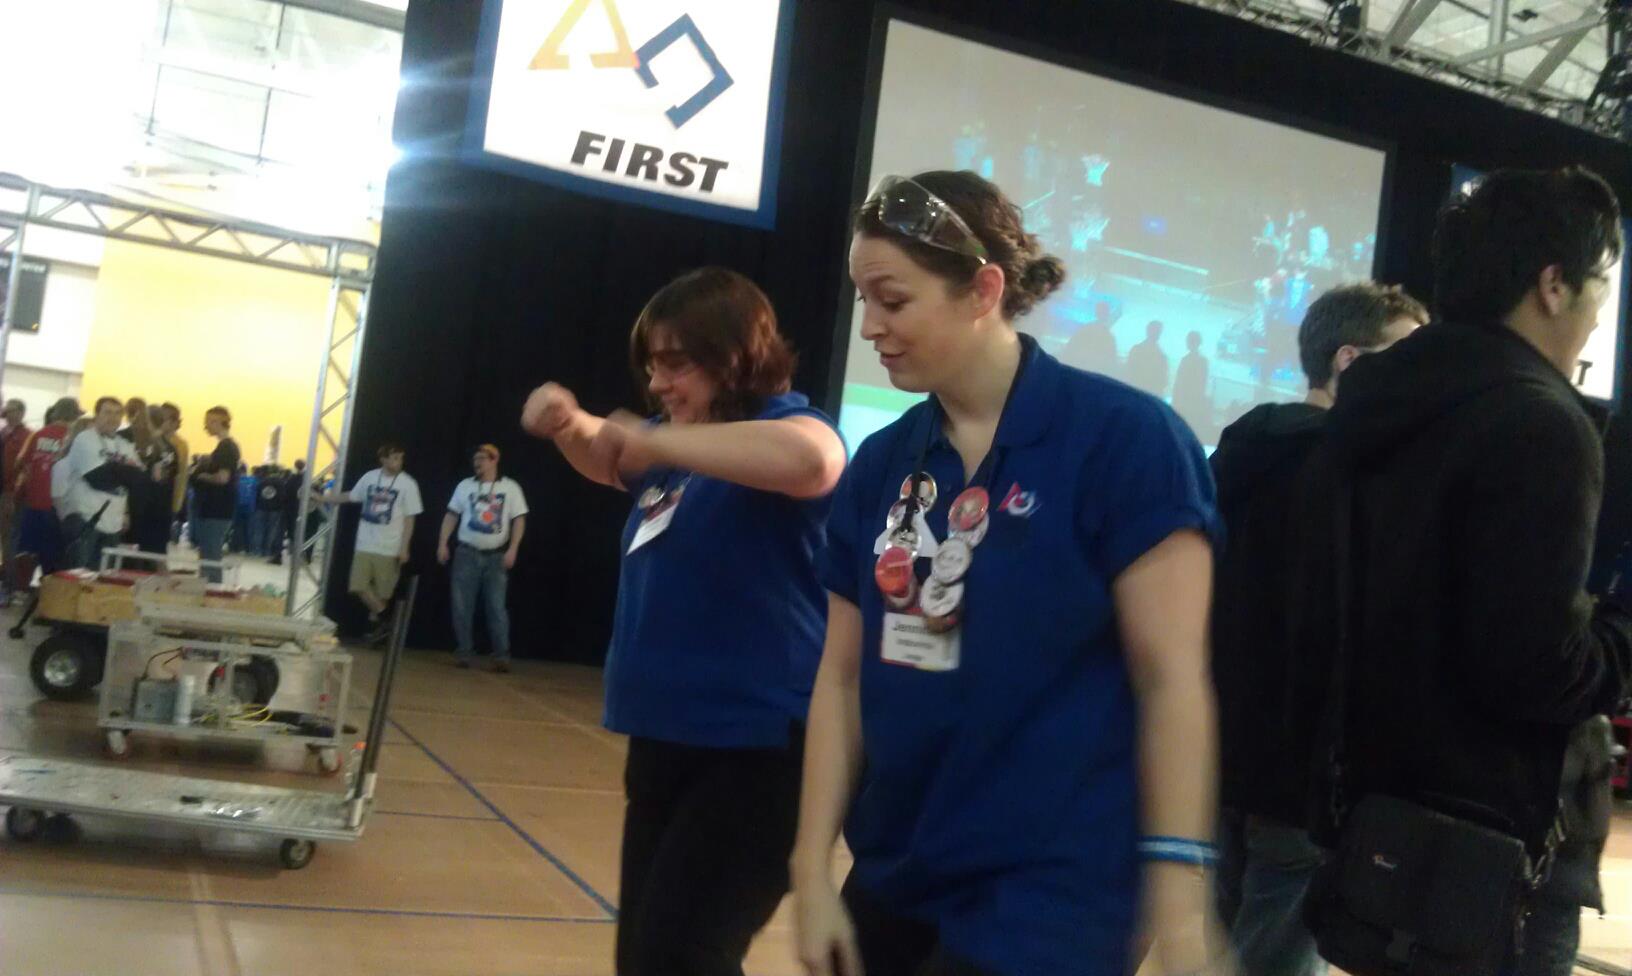 Tenrehte CEO Jennifer Indovina & Karen Fellows @ Rebound Rumble, the 2012 FIRST Robotics Competition at RIT